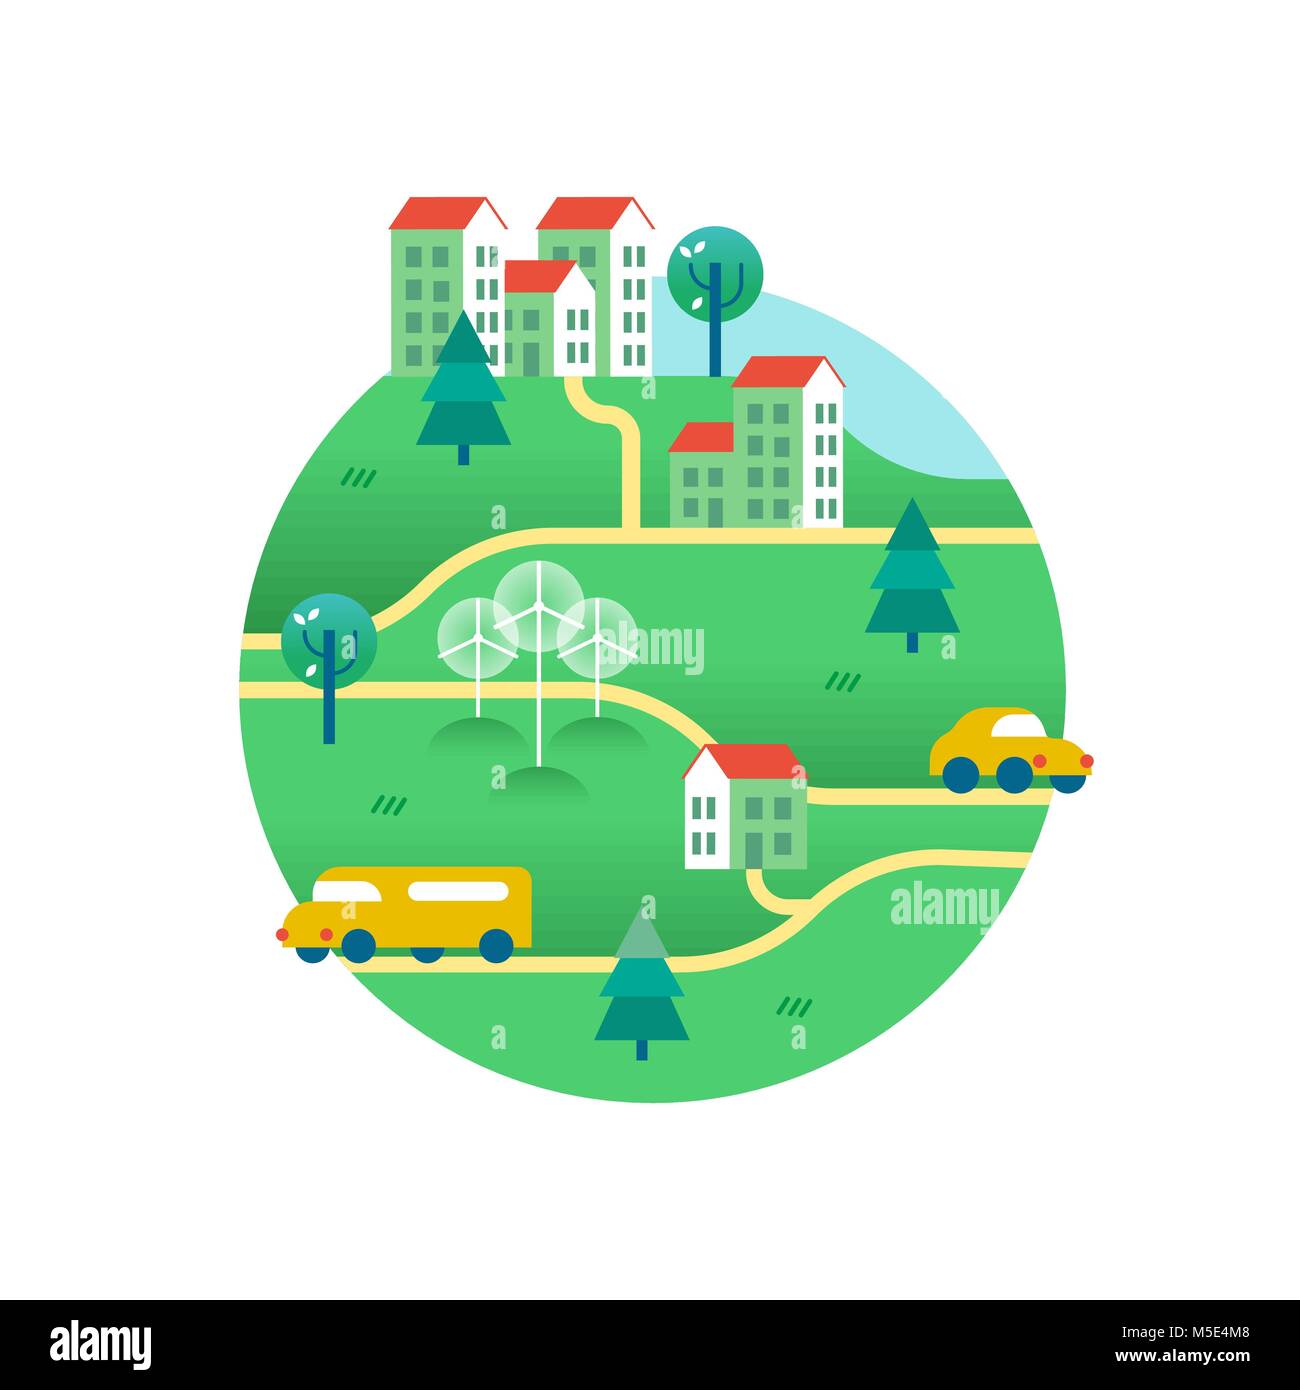 Eco friendly world with public transport, electric cars, solar panels on houses and wind turbines. Environment conservation concept illustration in mo Stock Vector